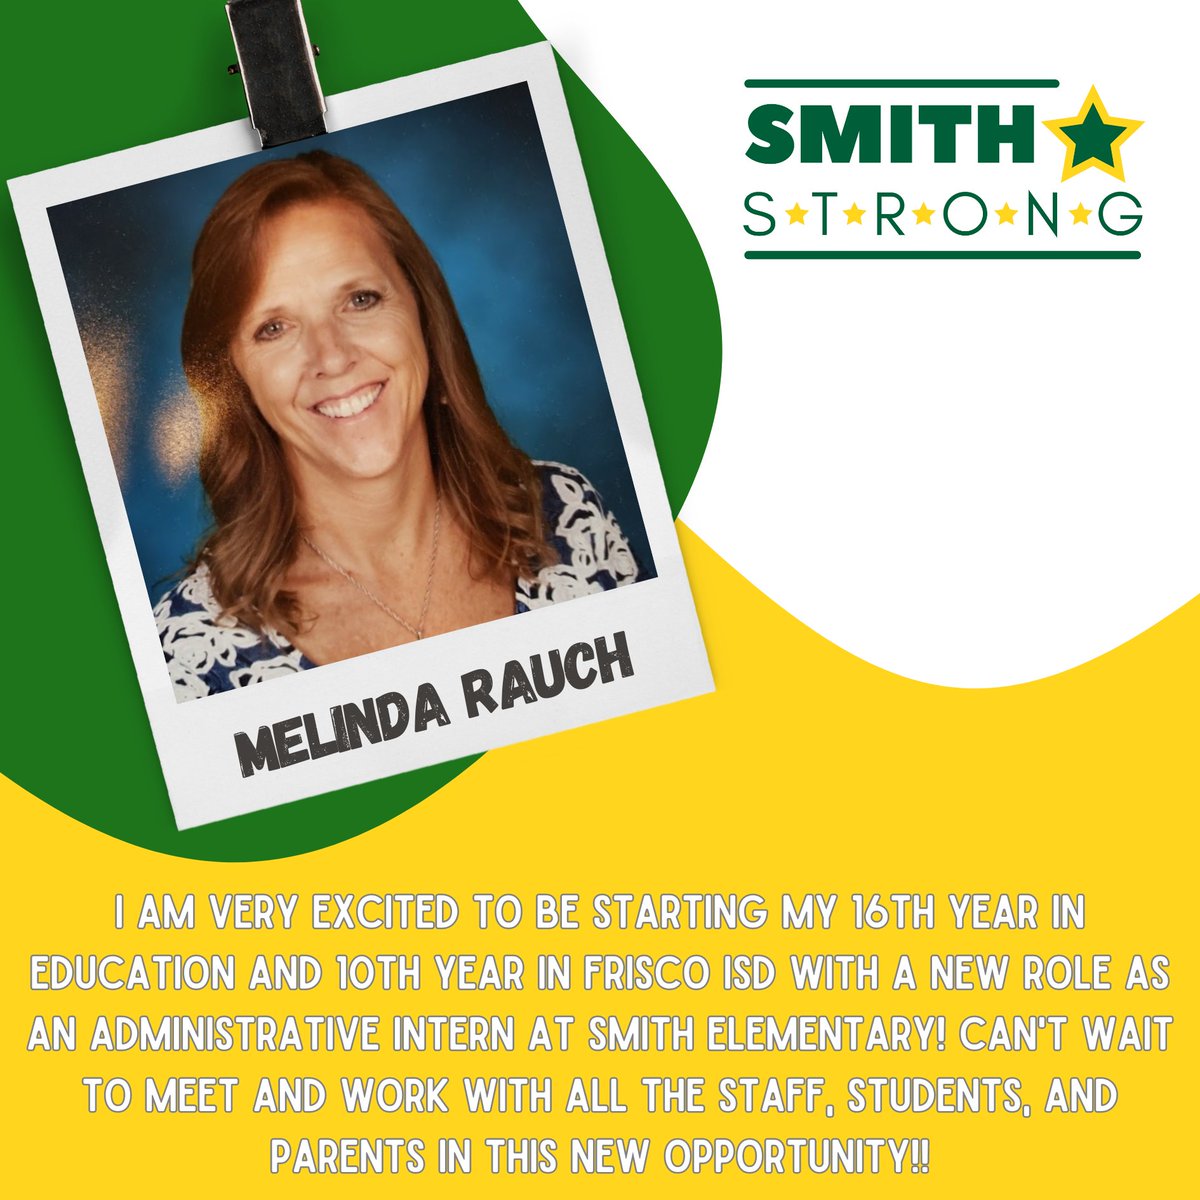 #SMITHSTRONG💪, help us welcome Melinda Rauch to Smith Elementary! She will be joining our Admin team here at Smith Elementary!💪💚⭐️